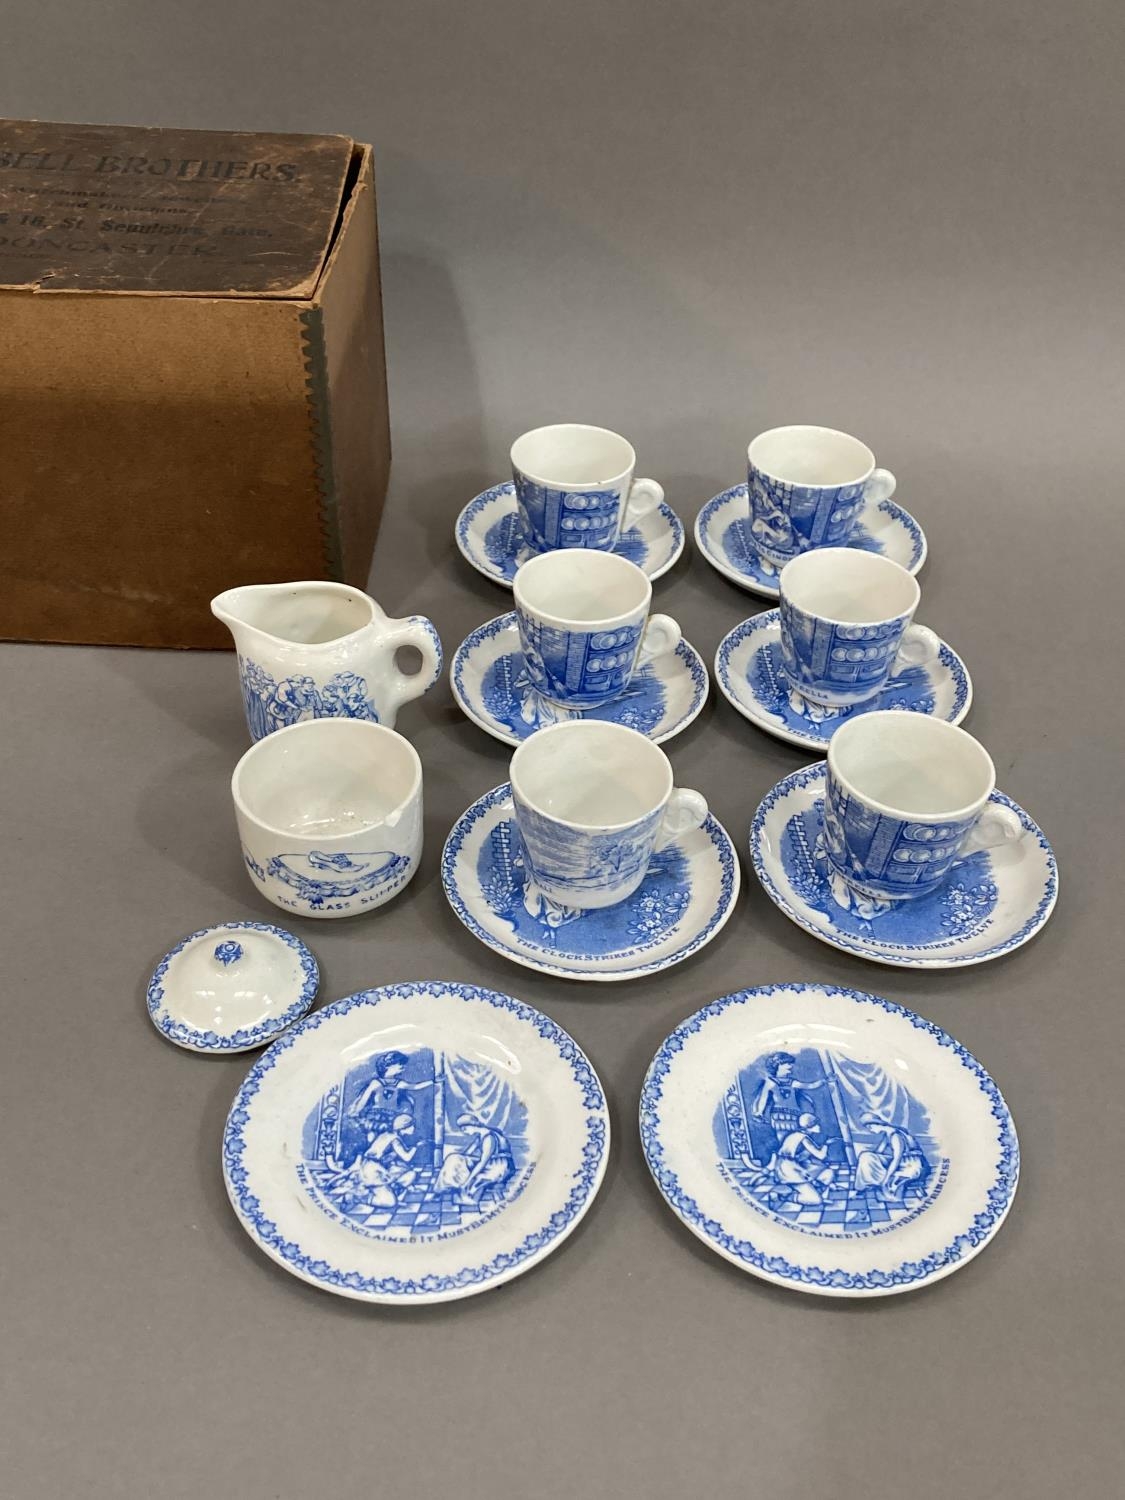 A 19th century blue and white miniature dolls tea set painted with scenes from Cinderella,